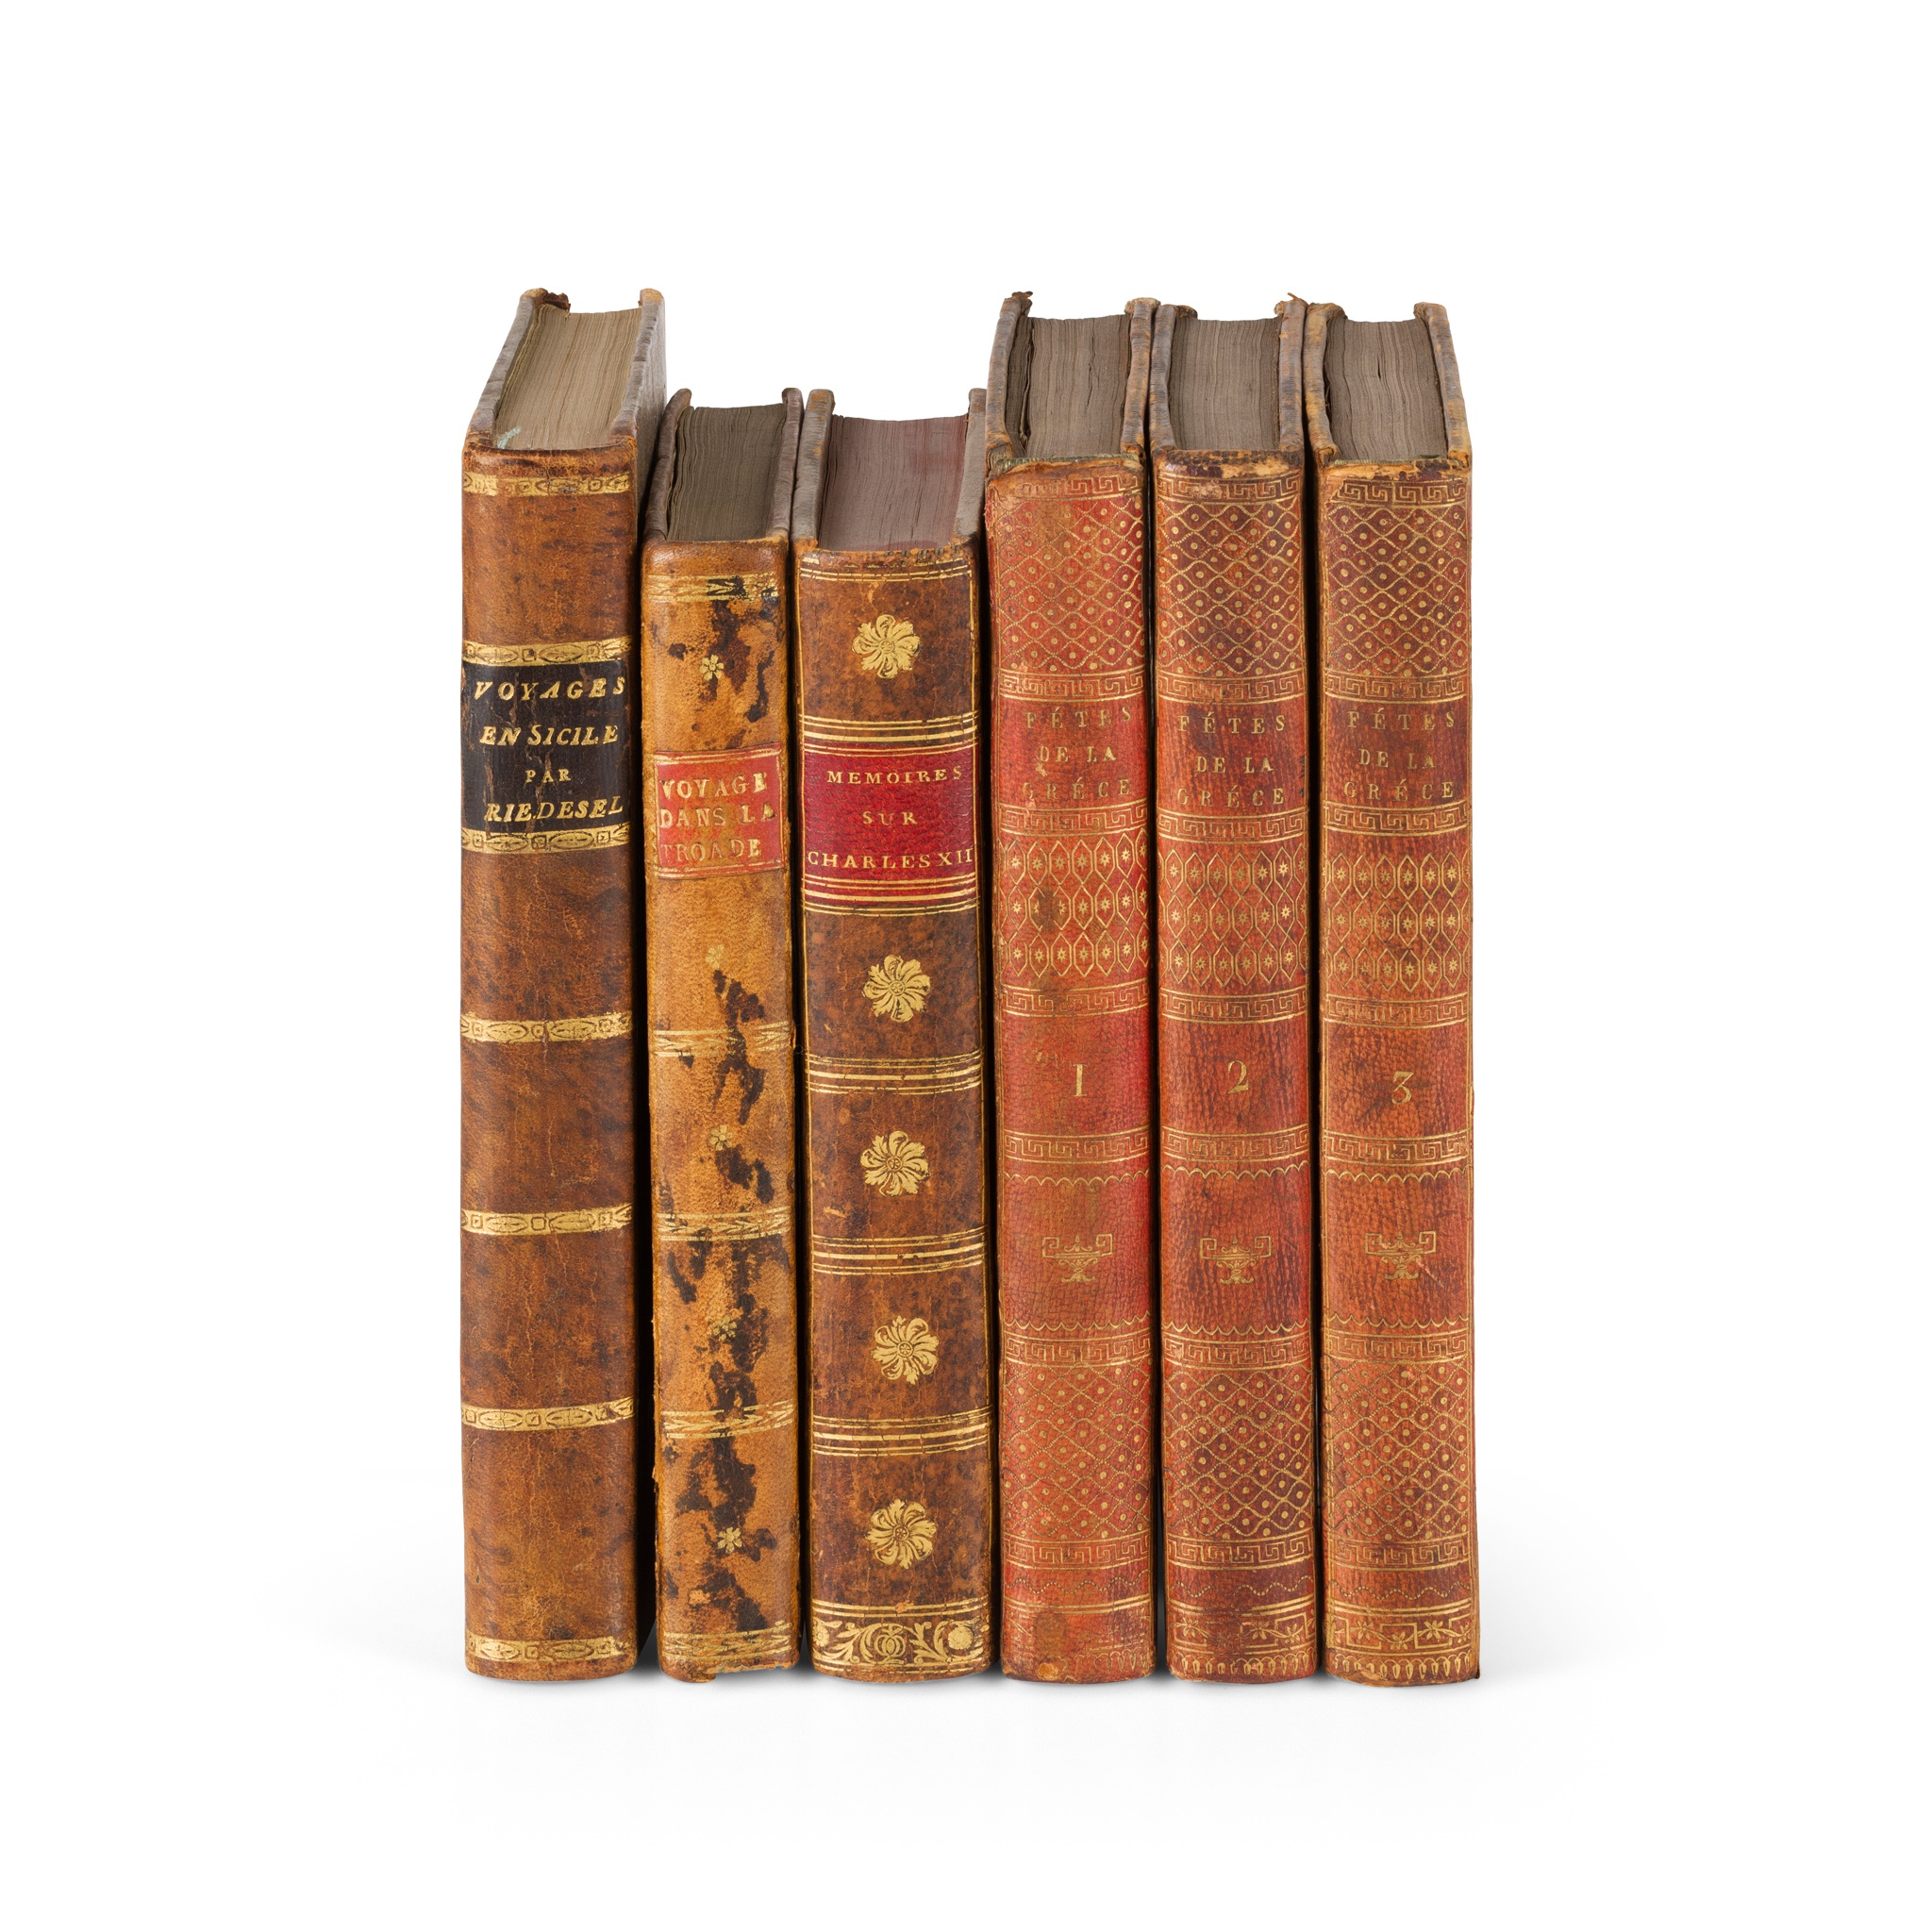 French, 18th century works comprising